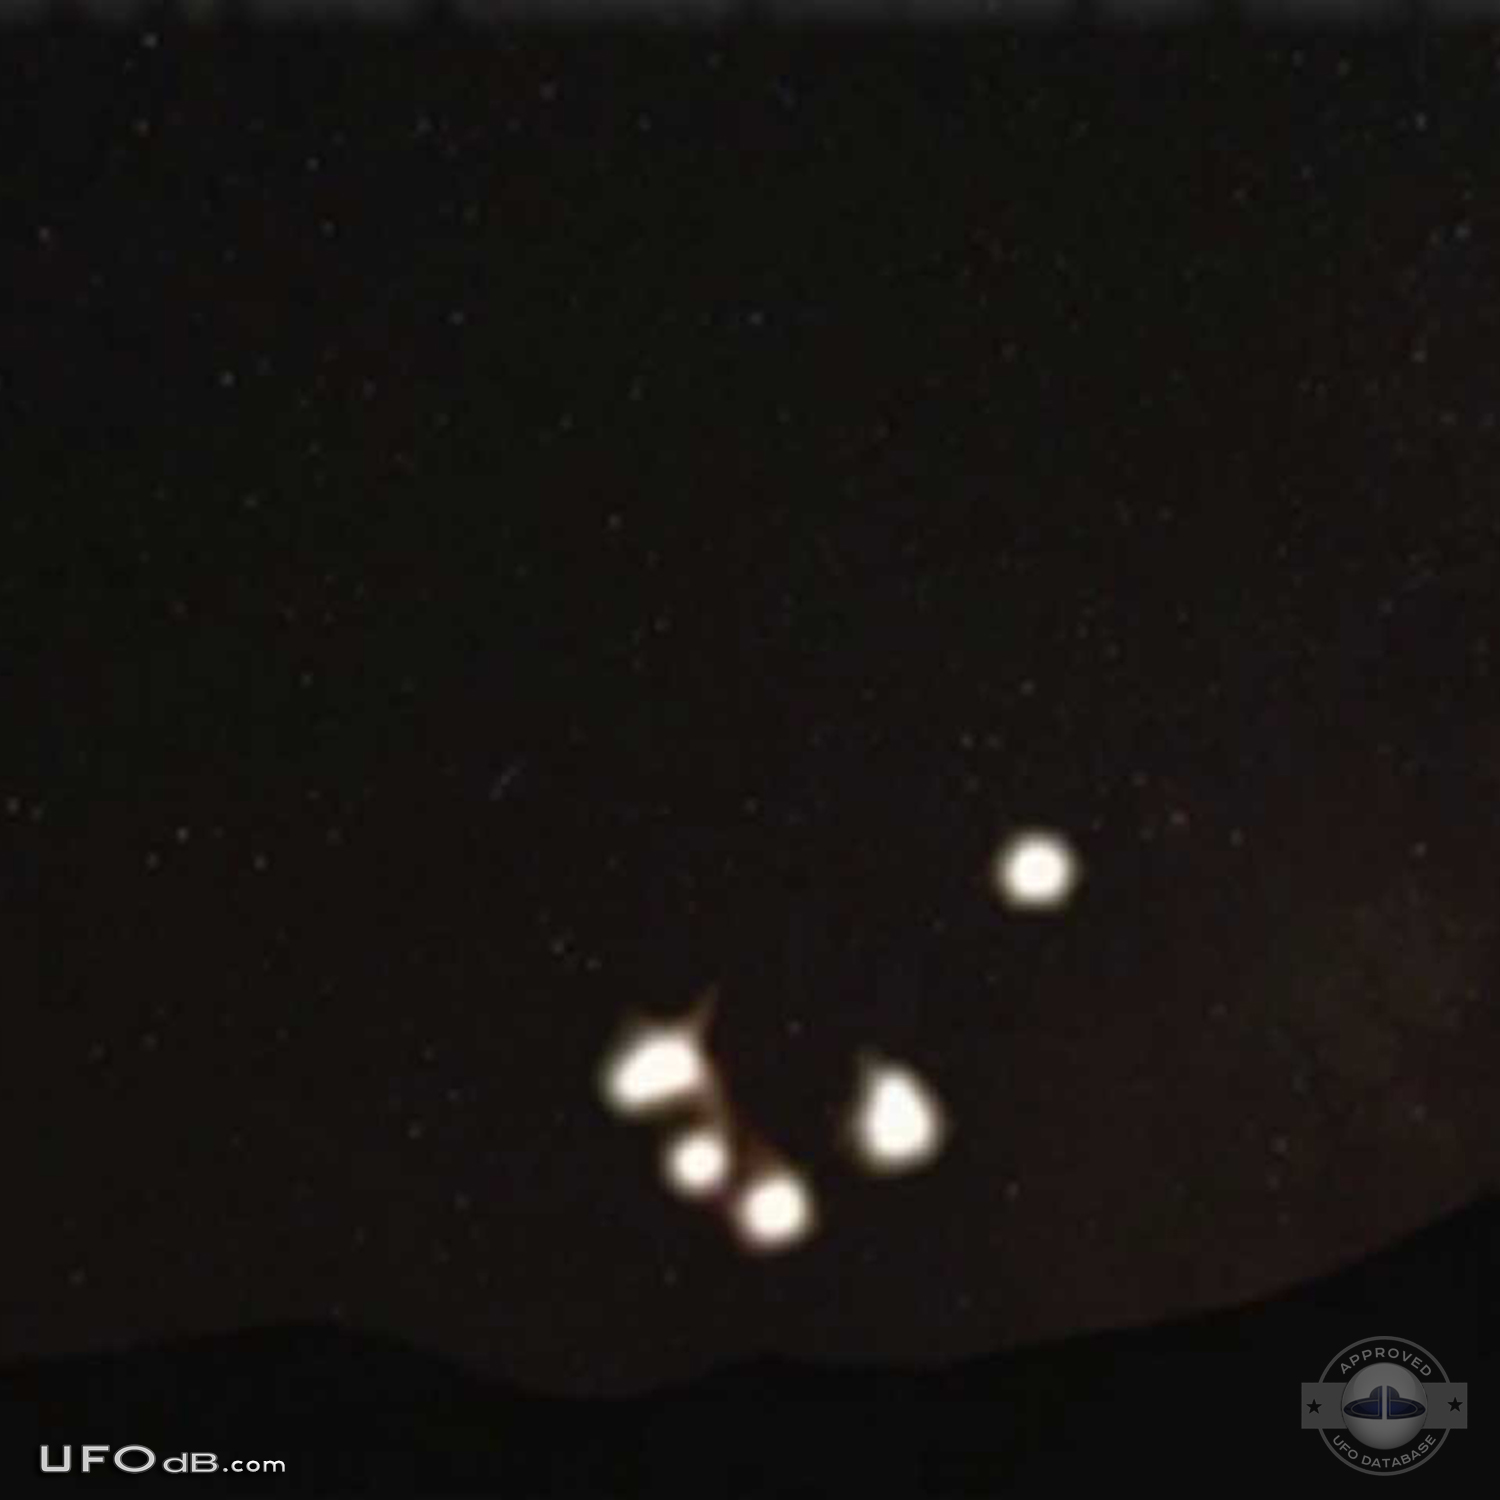 Formation of UFOs of different sizes in the night over Crimea, Ukraine UFO Picture #385-3